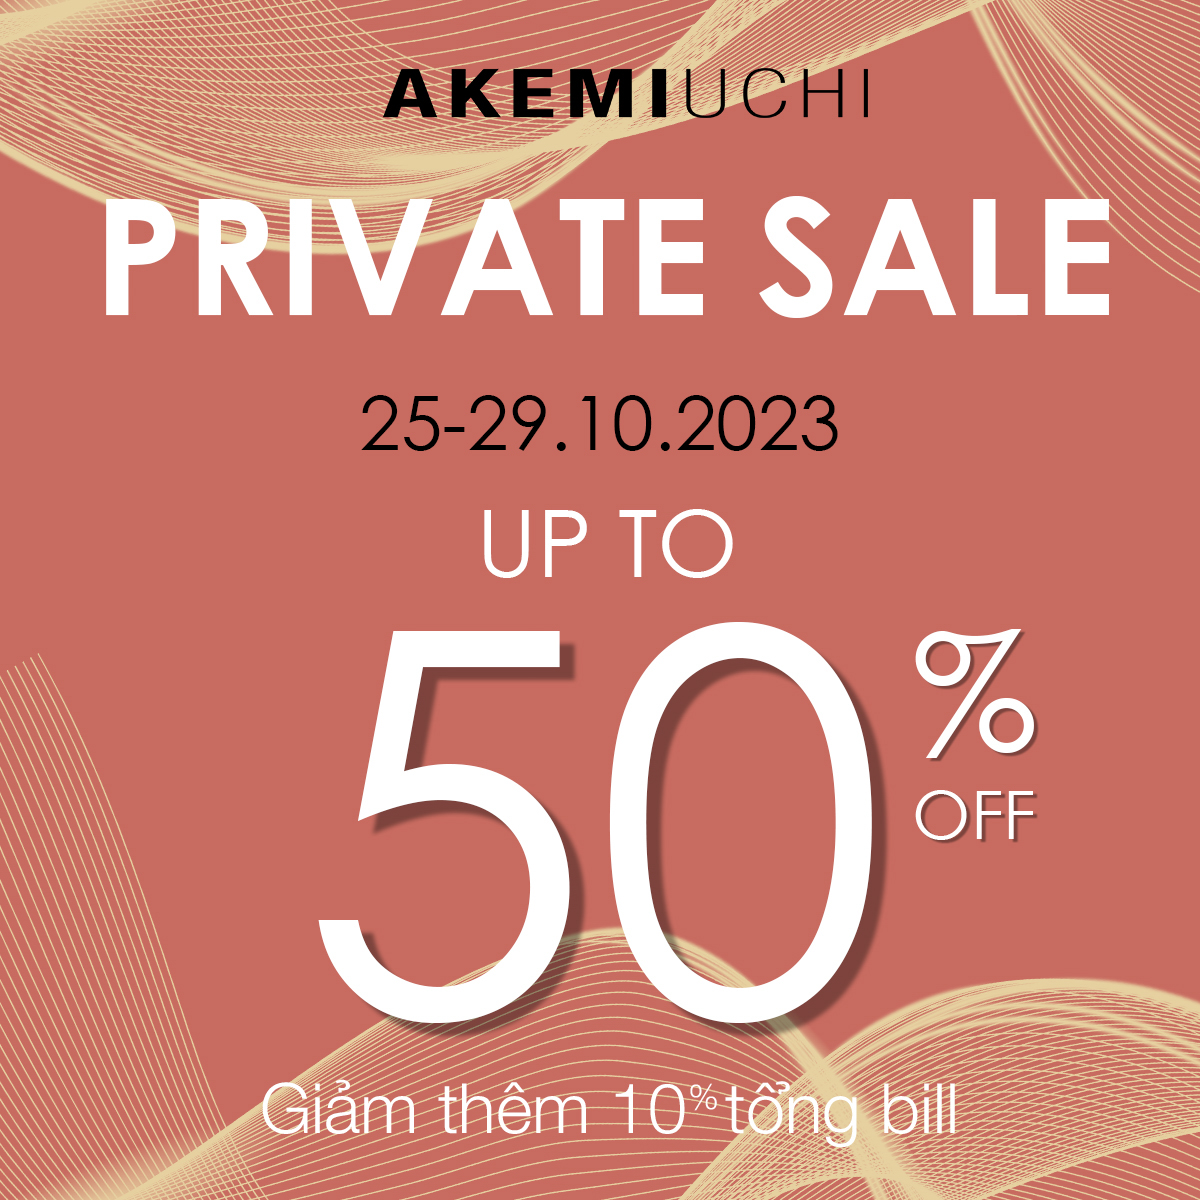 ⚡PRIVATE SALE - EXTRA 10% OFF⚡